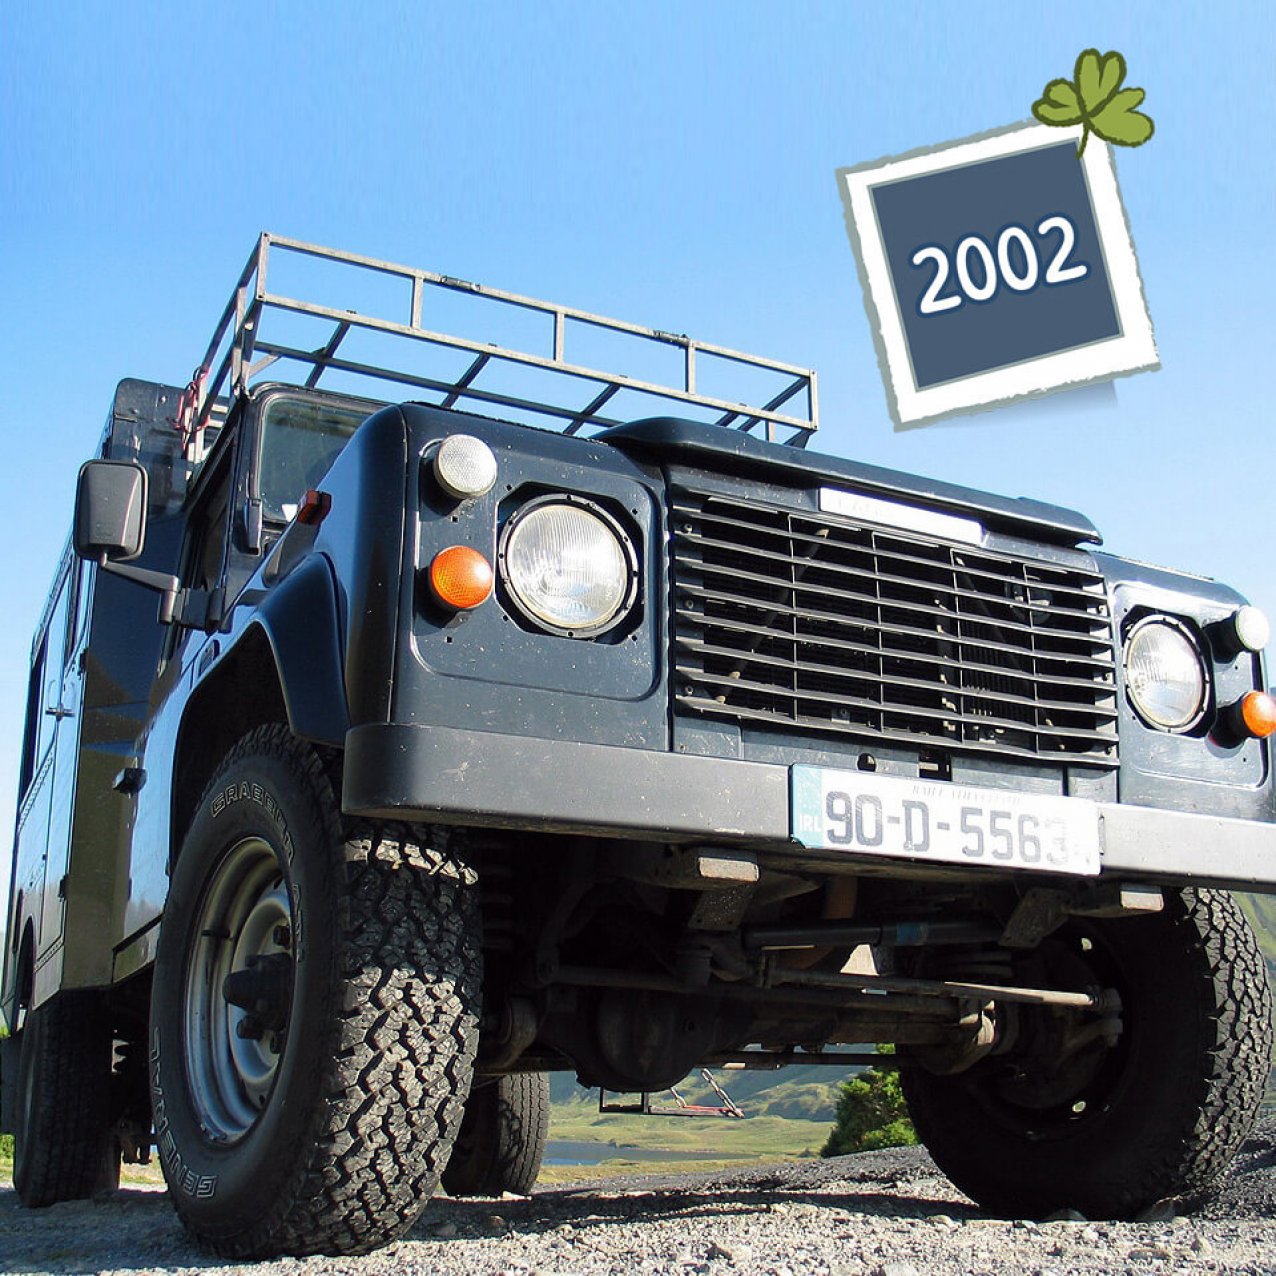 A from-the-ground perspective of the original 1990 Land Rover Defender VagaTron 4x4 tour vehicle for Vagabond Tours of Ireland